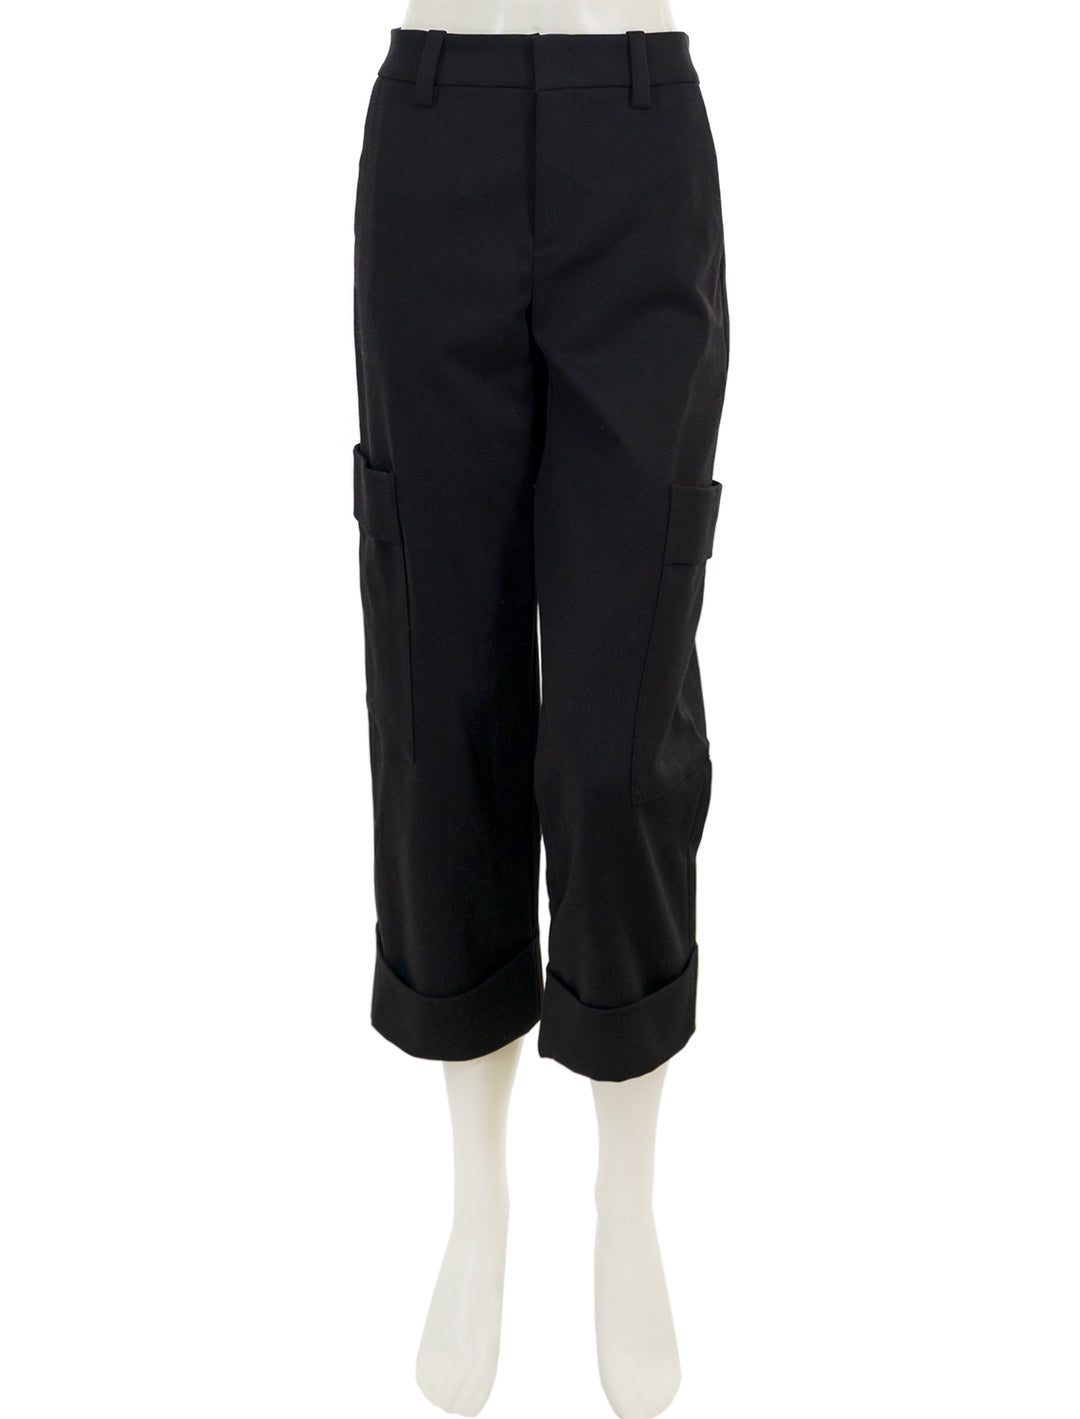 Front view of Vince's utility crop pant in black.